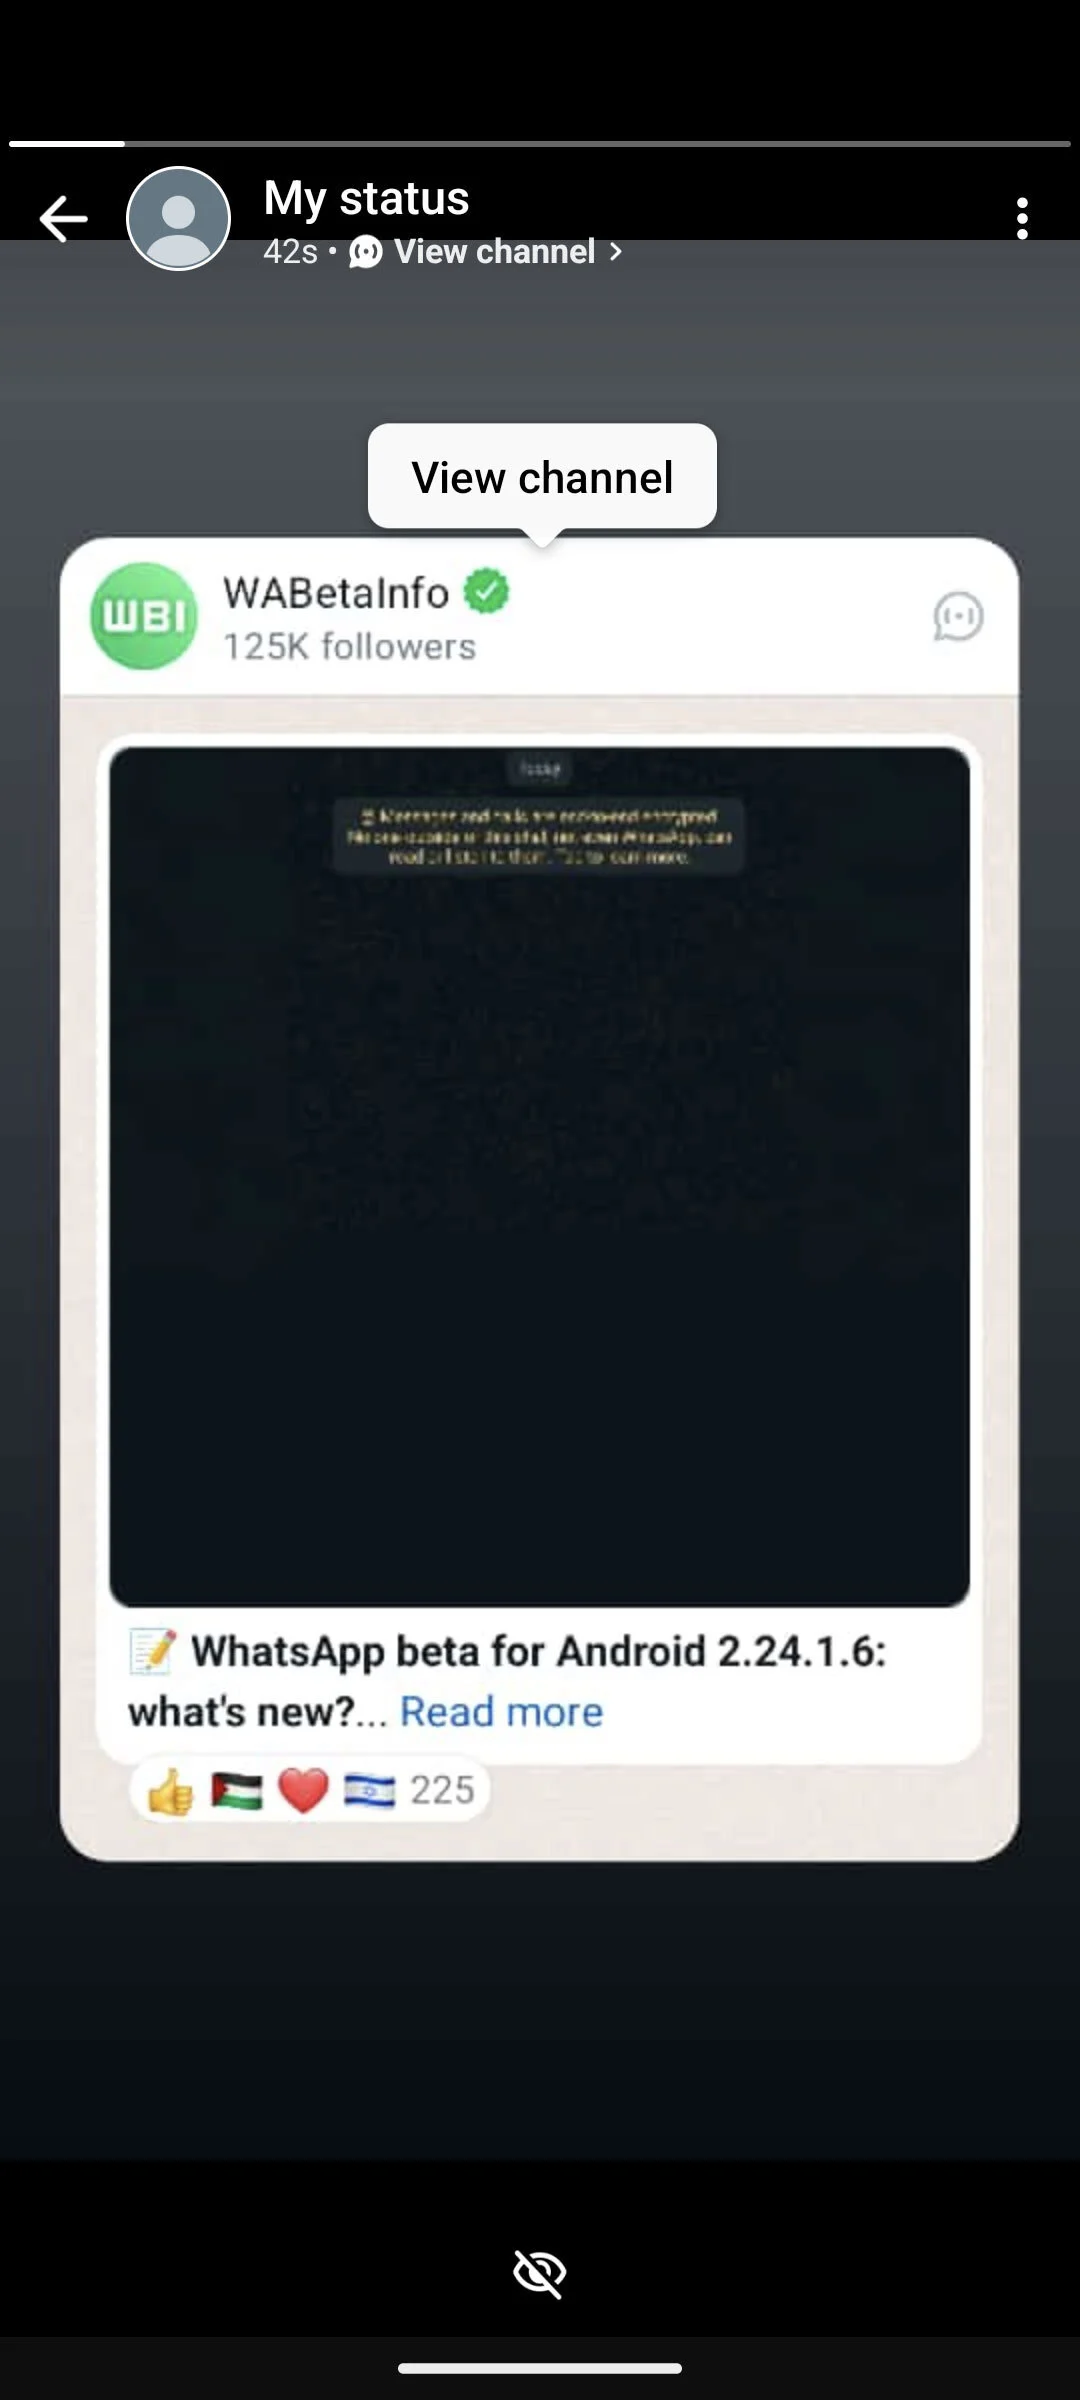 What's the latest WhatsApp interface update?